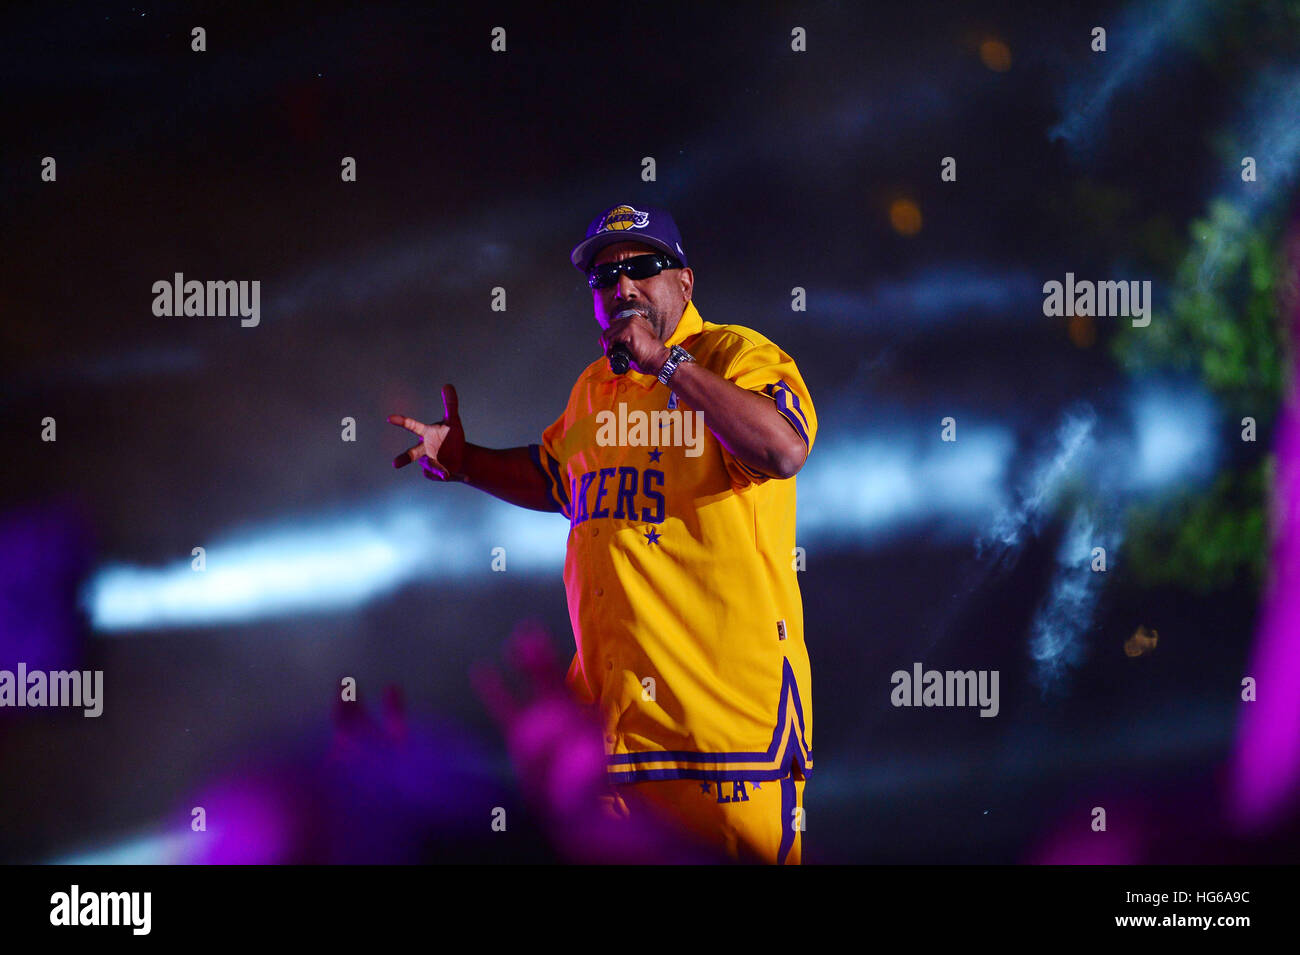 Miami, FL, USA. 31st Dec, 2017. Tone Loc performs during Pitbull's New Year's Revolution at Bayfront Park on December 31, 2016 in Miami, Florida. © Mpi10/Media Punch/Alamy Live News Stock Photo